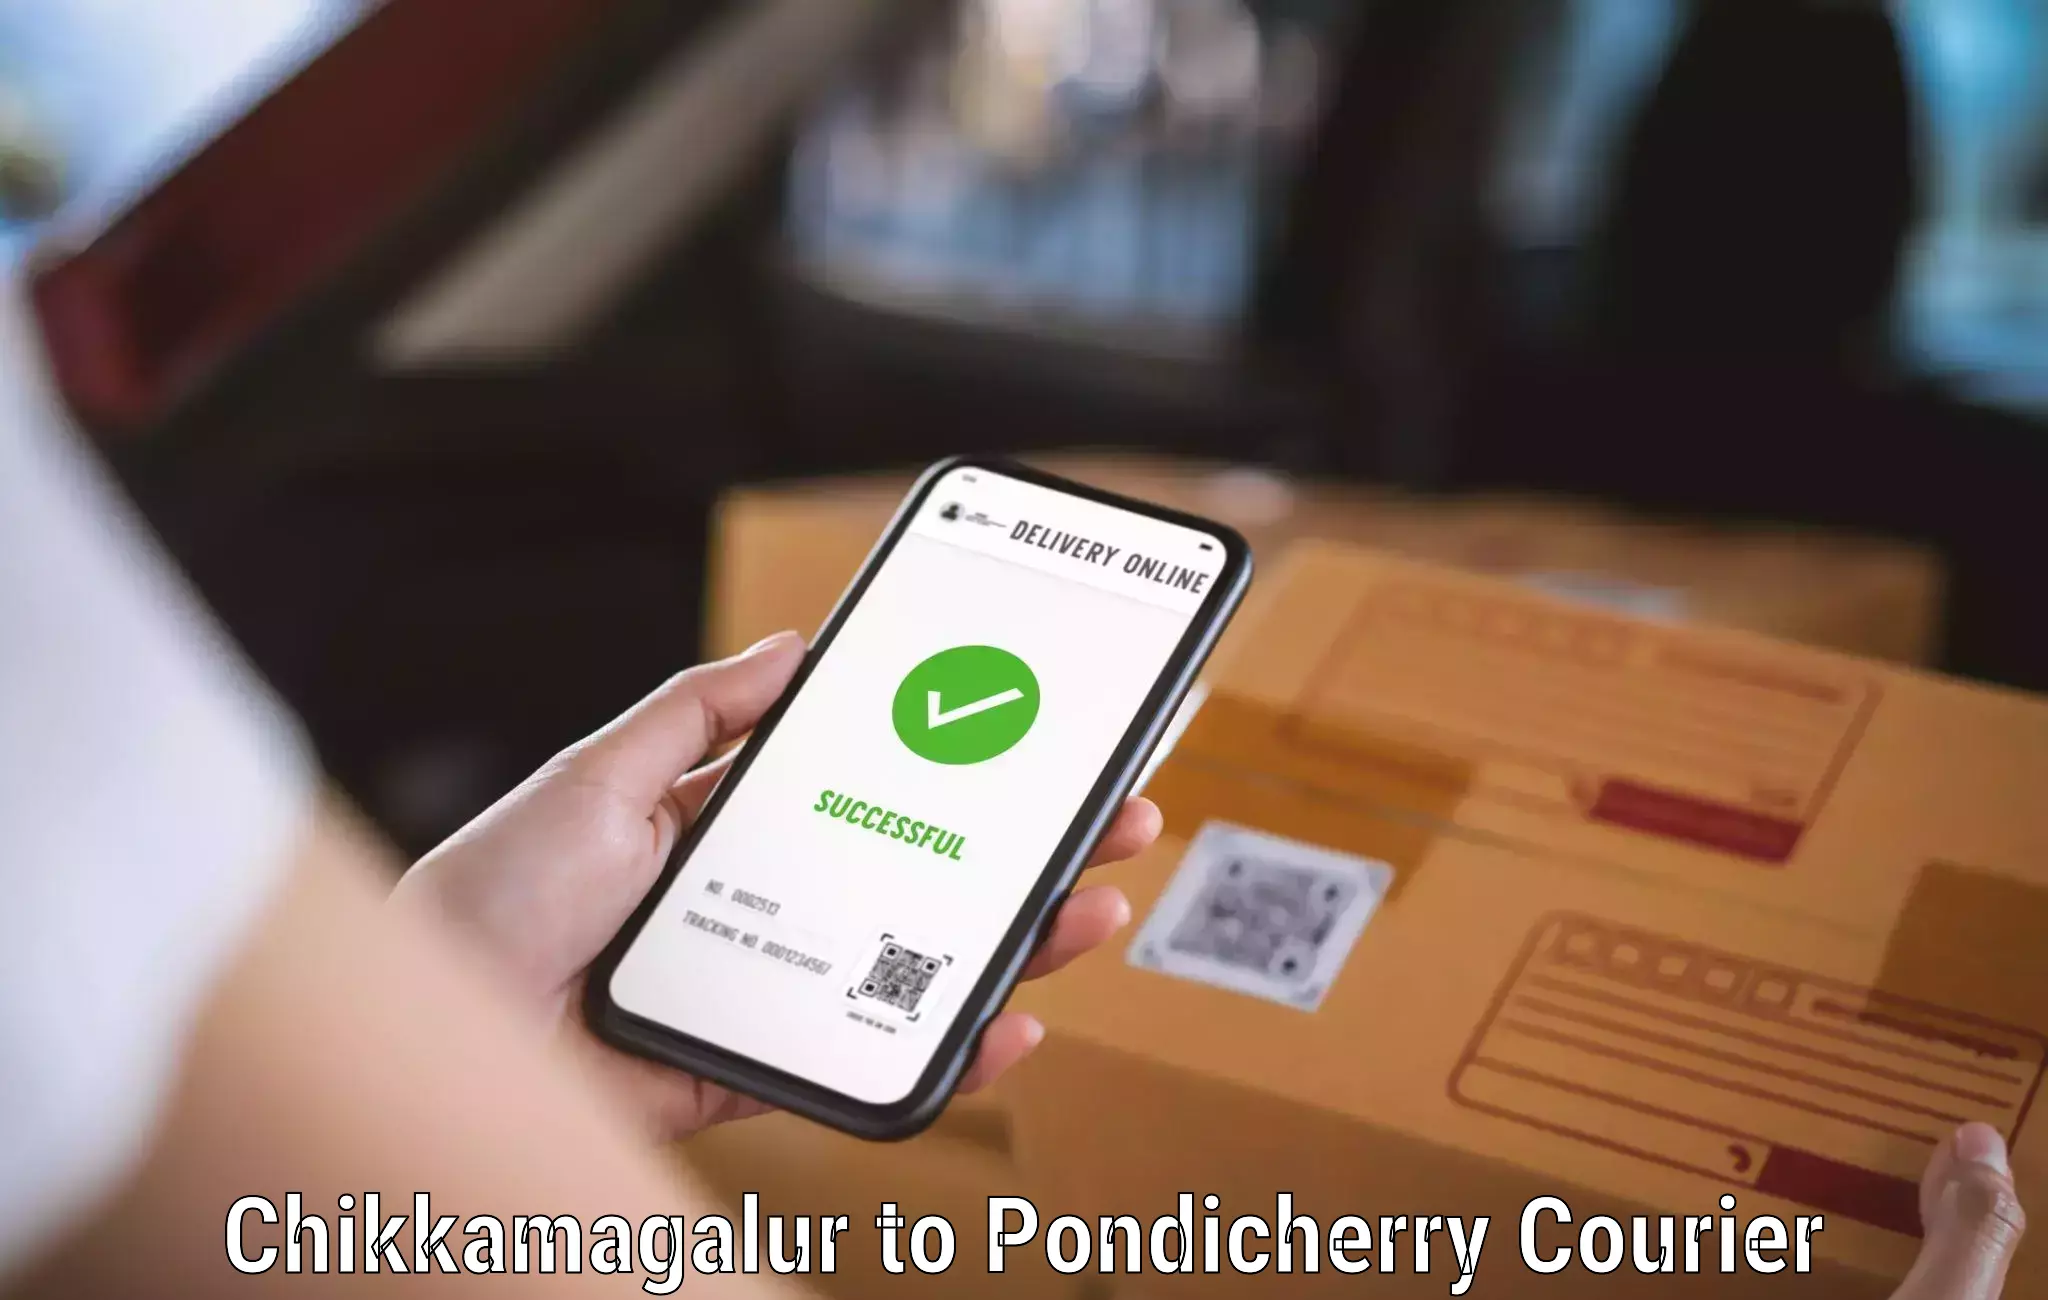 Cash on delivery service Chikkamagalur to Metttupalayam